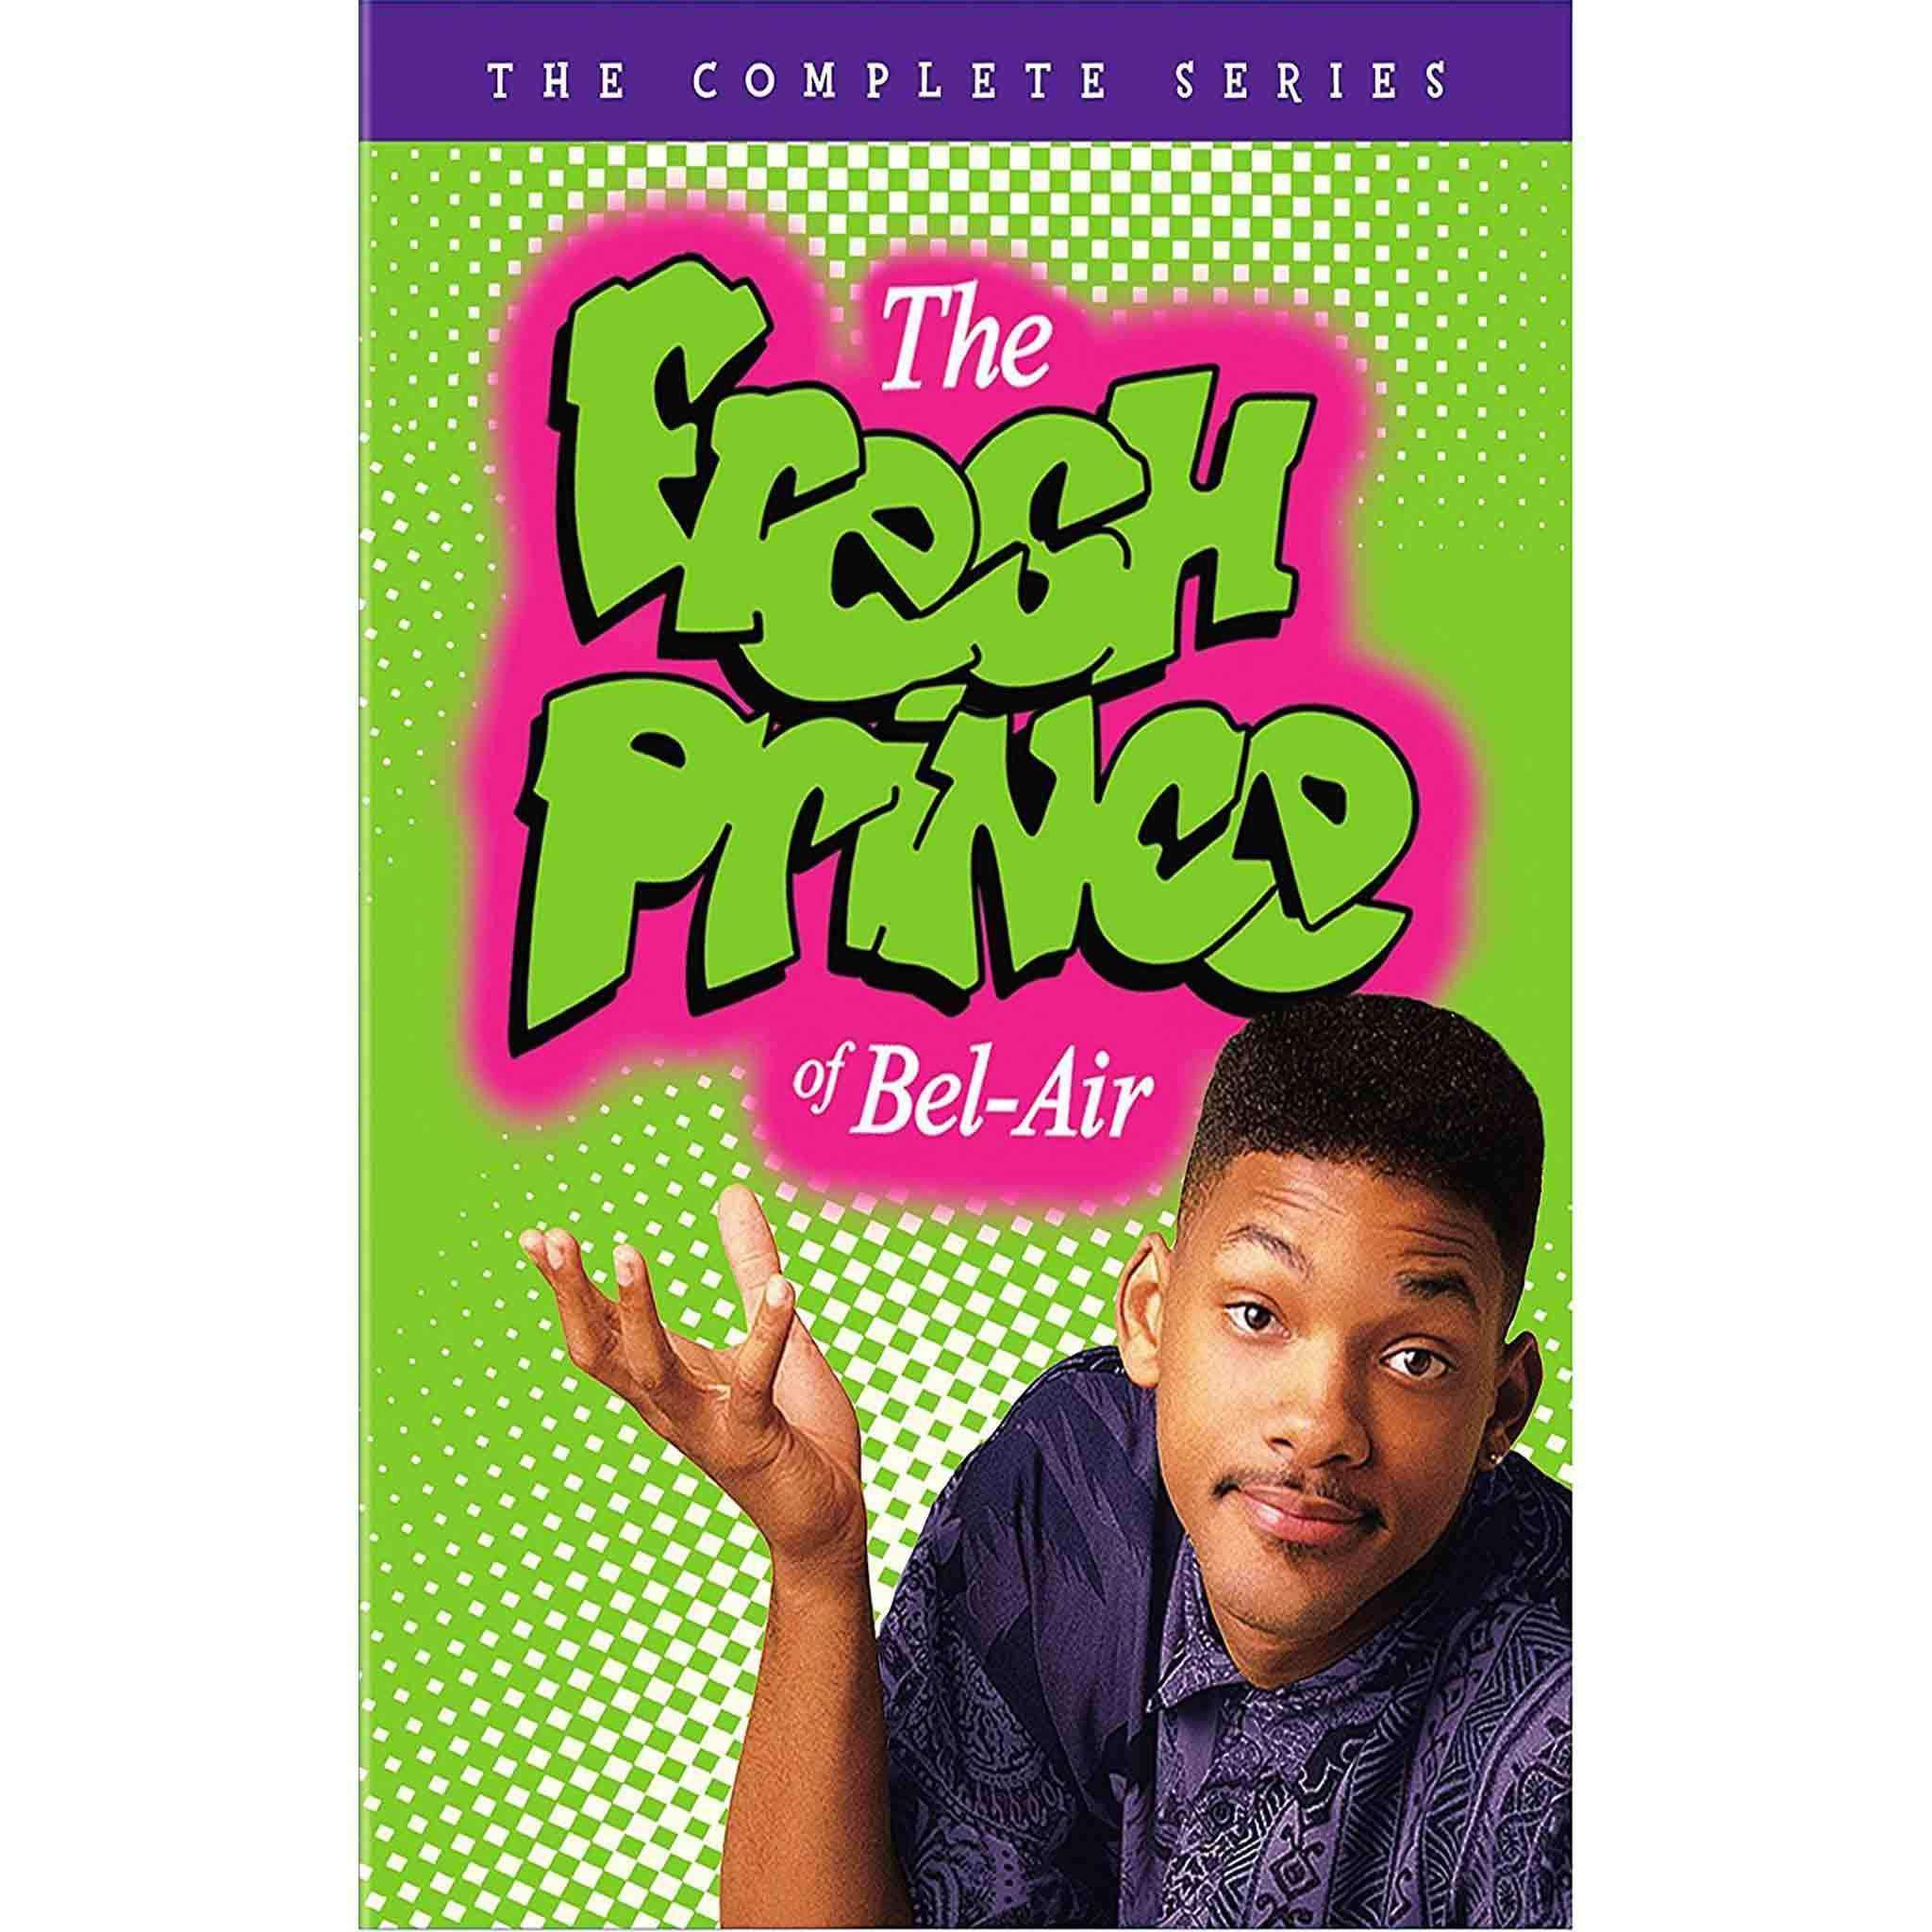 The Fresh Prince of Bel-Air DVD Complete Series Box Set Warner Brothers DVDs & Blu-ray Discs